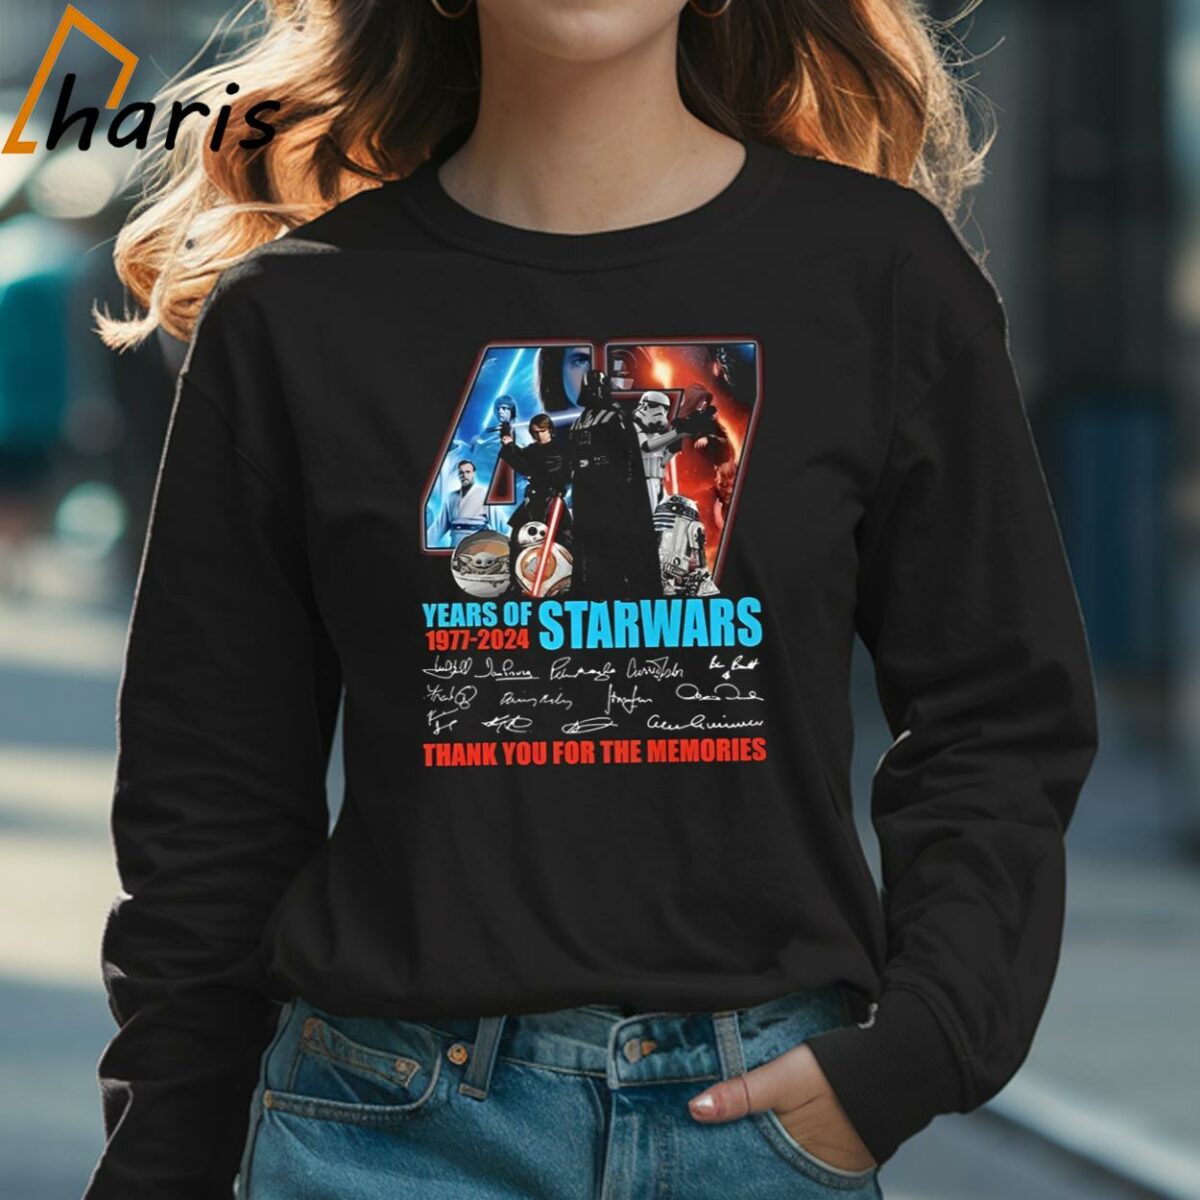 Star Wars 47 Years Of The Memories 1977 2024 Thank You Fan Signatures T shirt 3 Long sleeve shirt